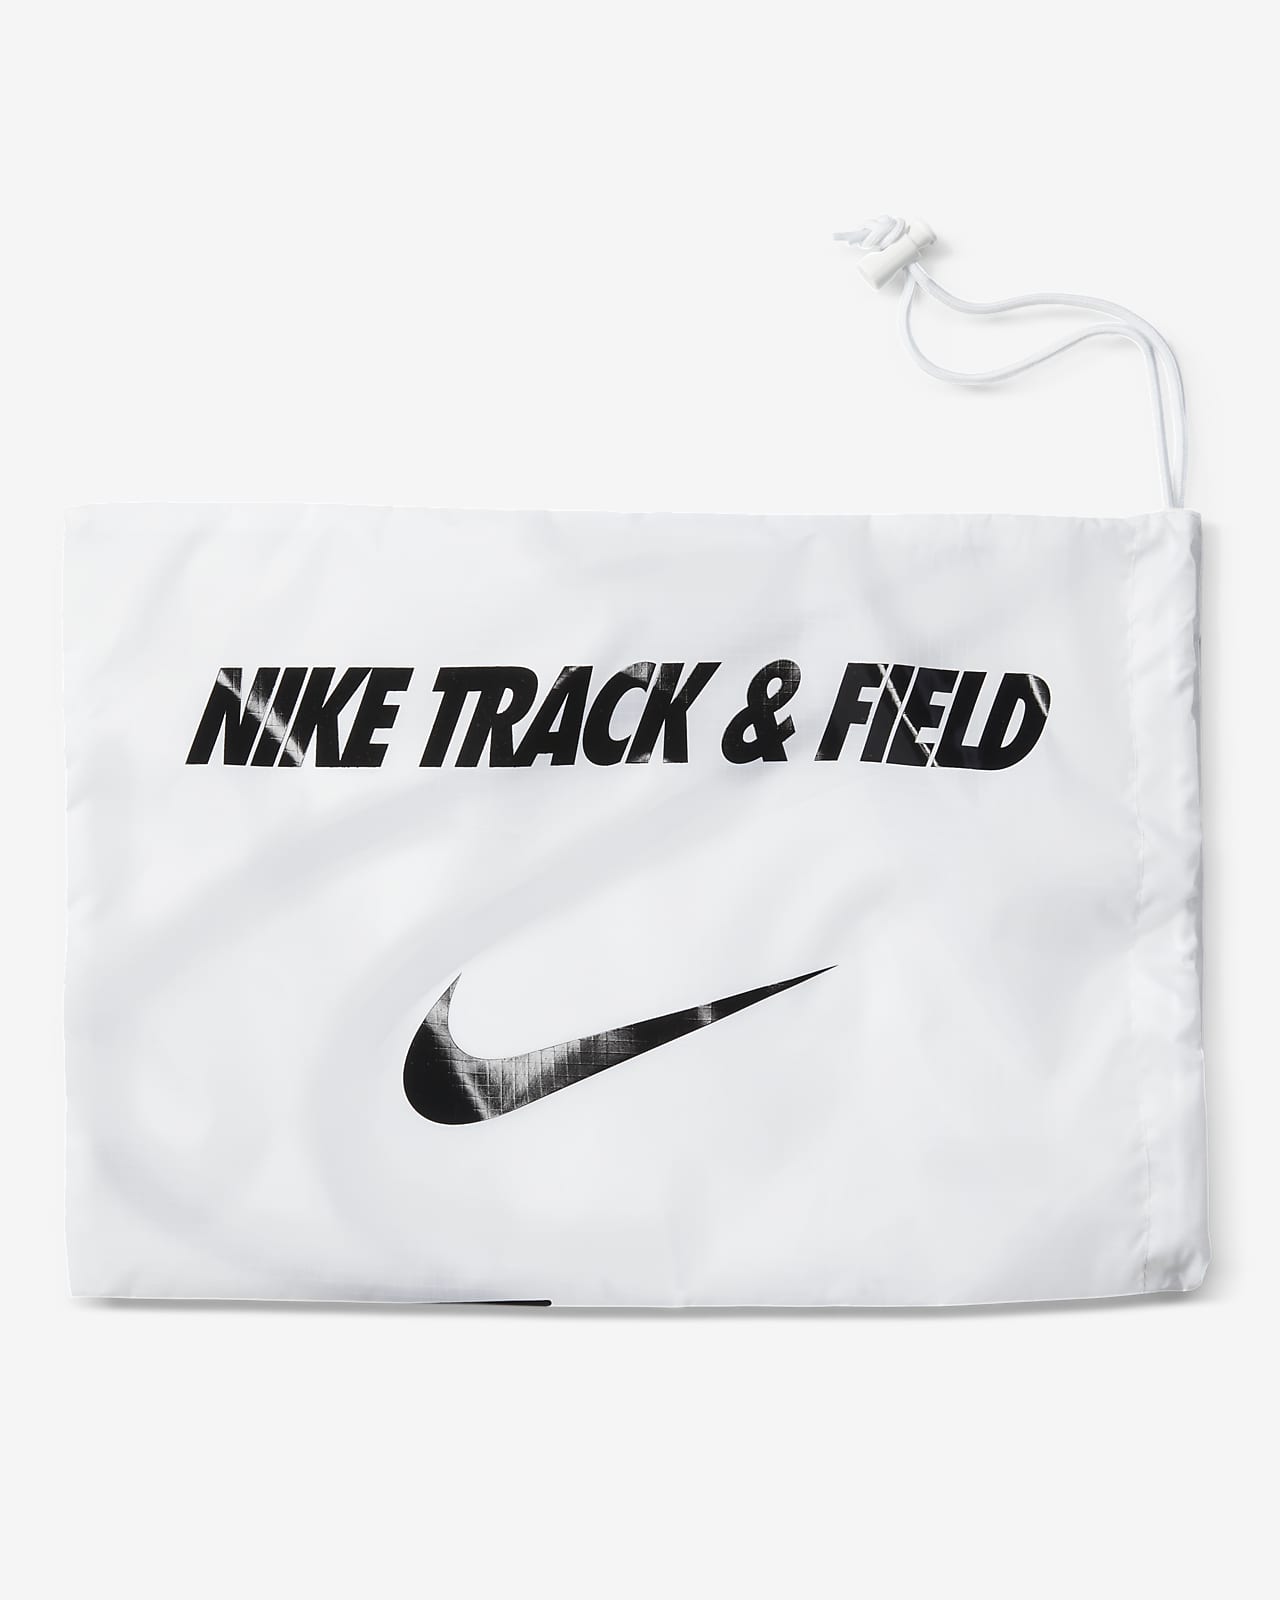 nike zoom sd 4 track and field shoes